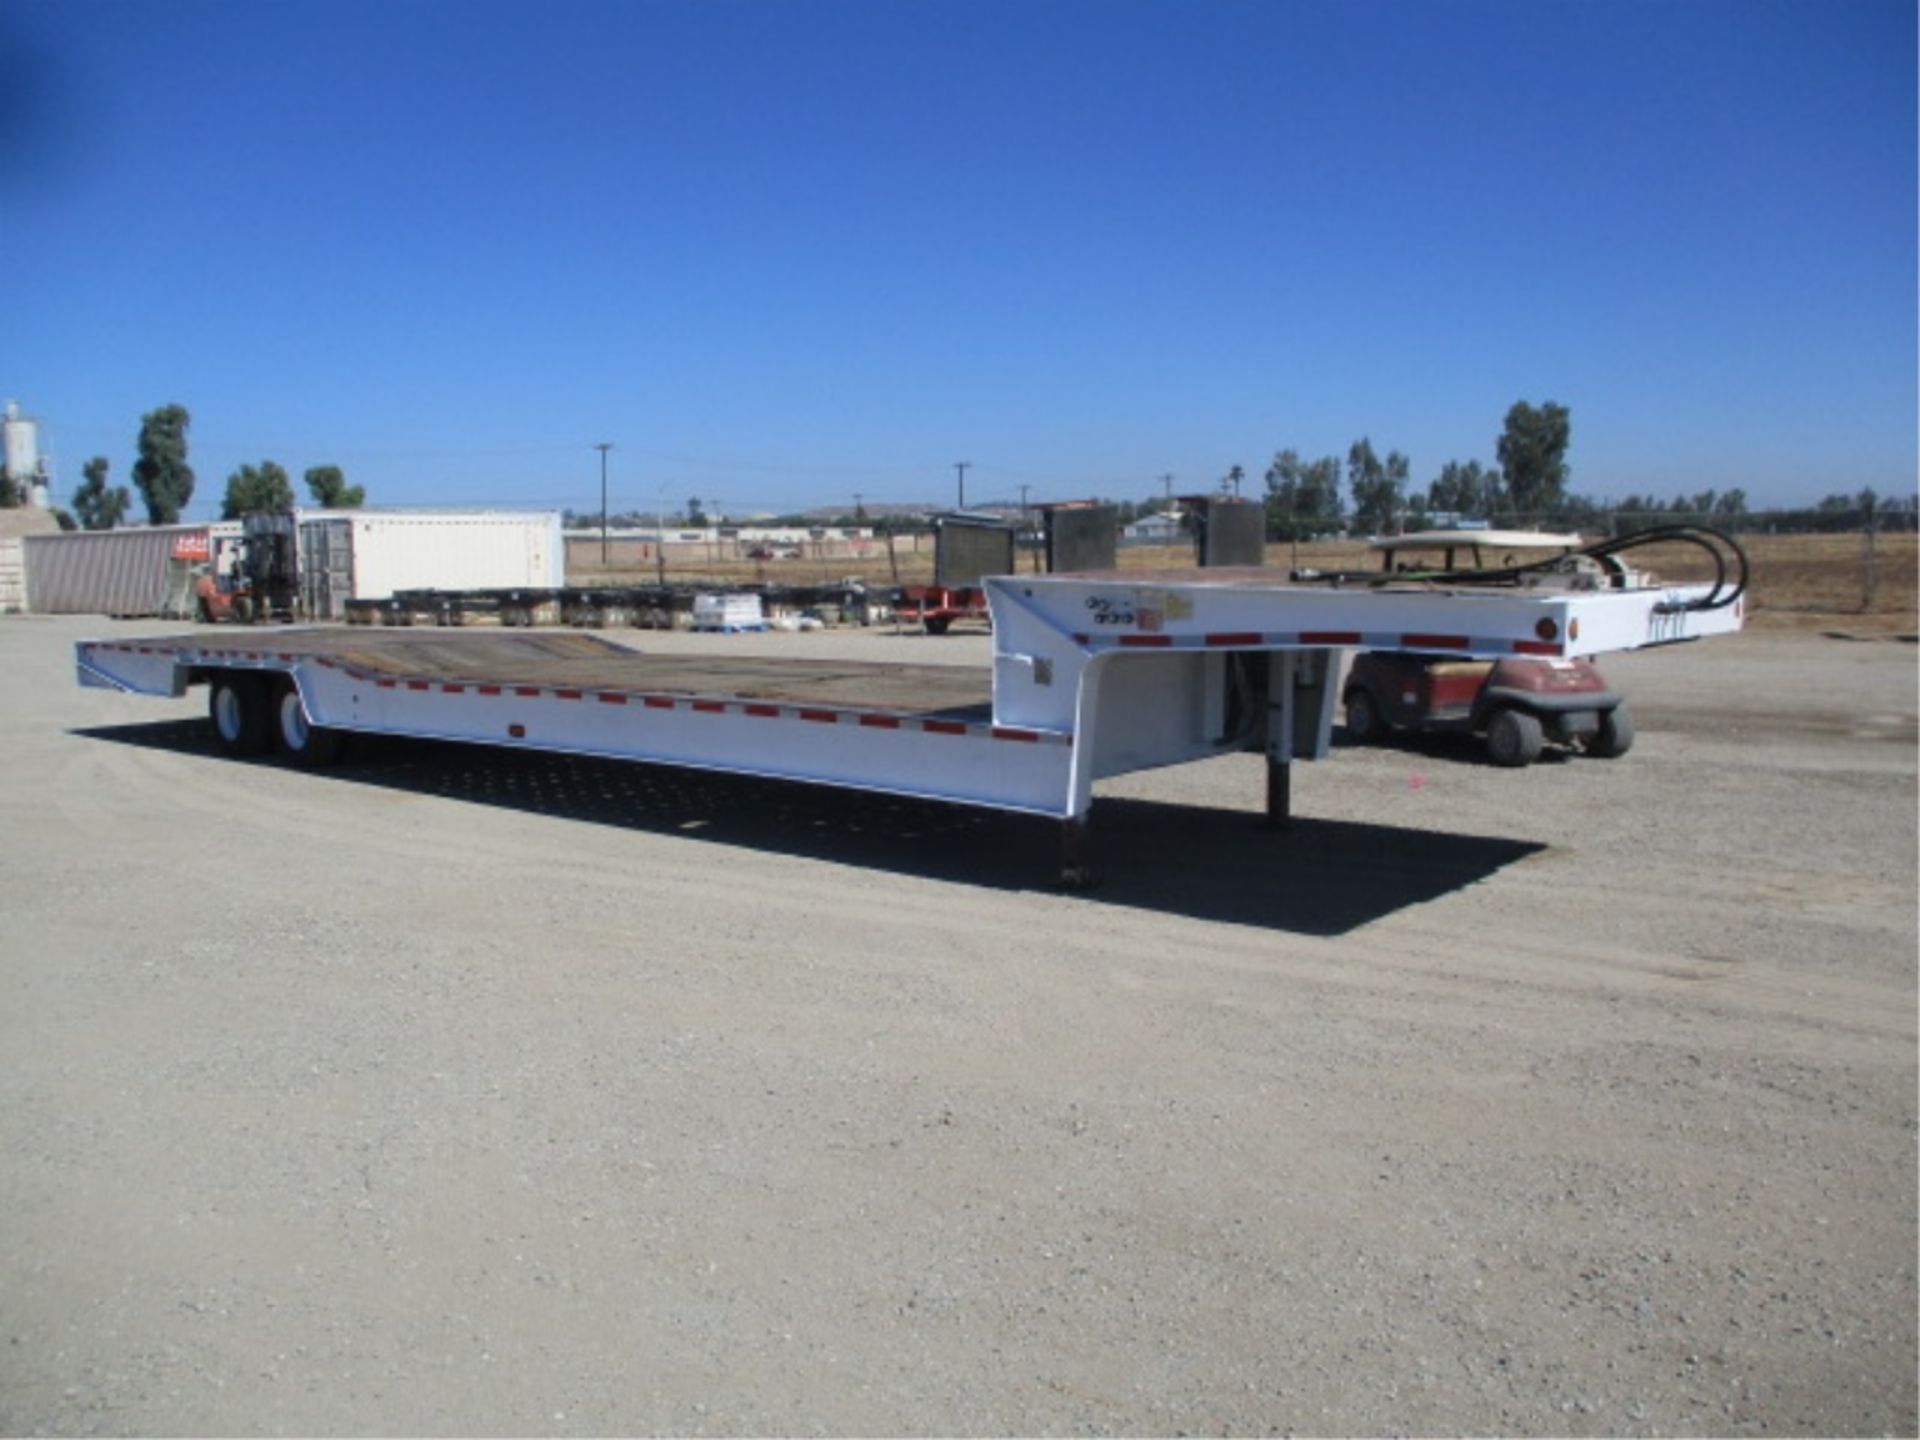 2000 Trail King TK70HT-482 T/A Equipment Trailer, 48', Wood Deck, Hydraulic Dove Tail, 10' Upper - Image 8 of 88